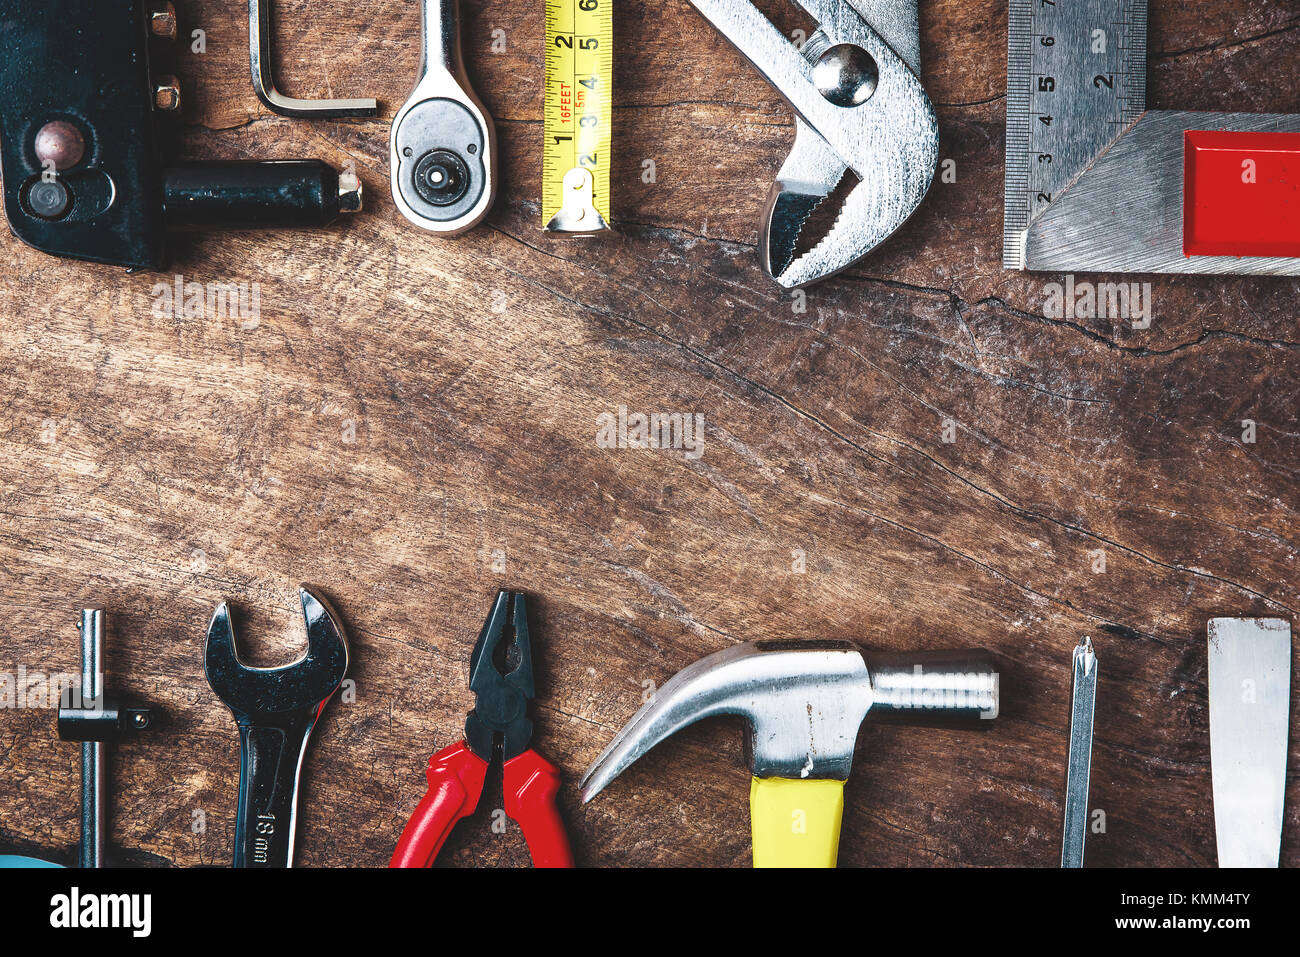 Top view of Working tools,wrench,socket wrench,hammer,screwdriver,plier,electric drill,tape measure,machinist square and safety glasses on wooden back Stock Photo